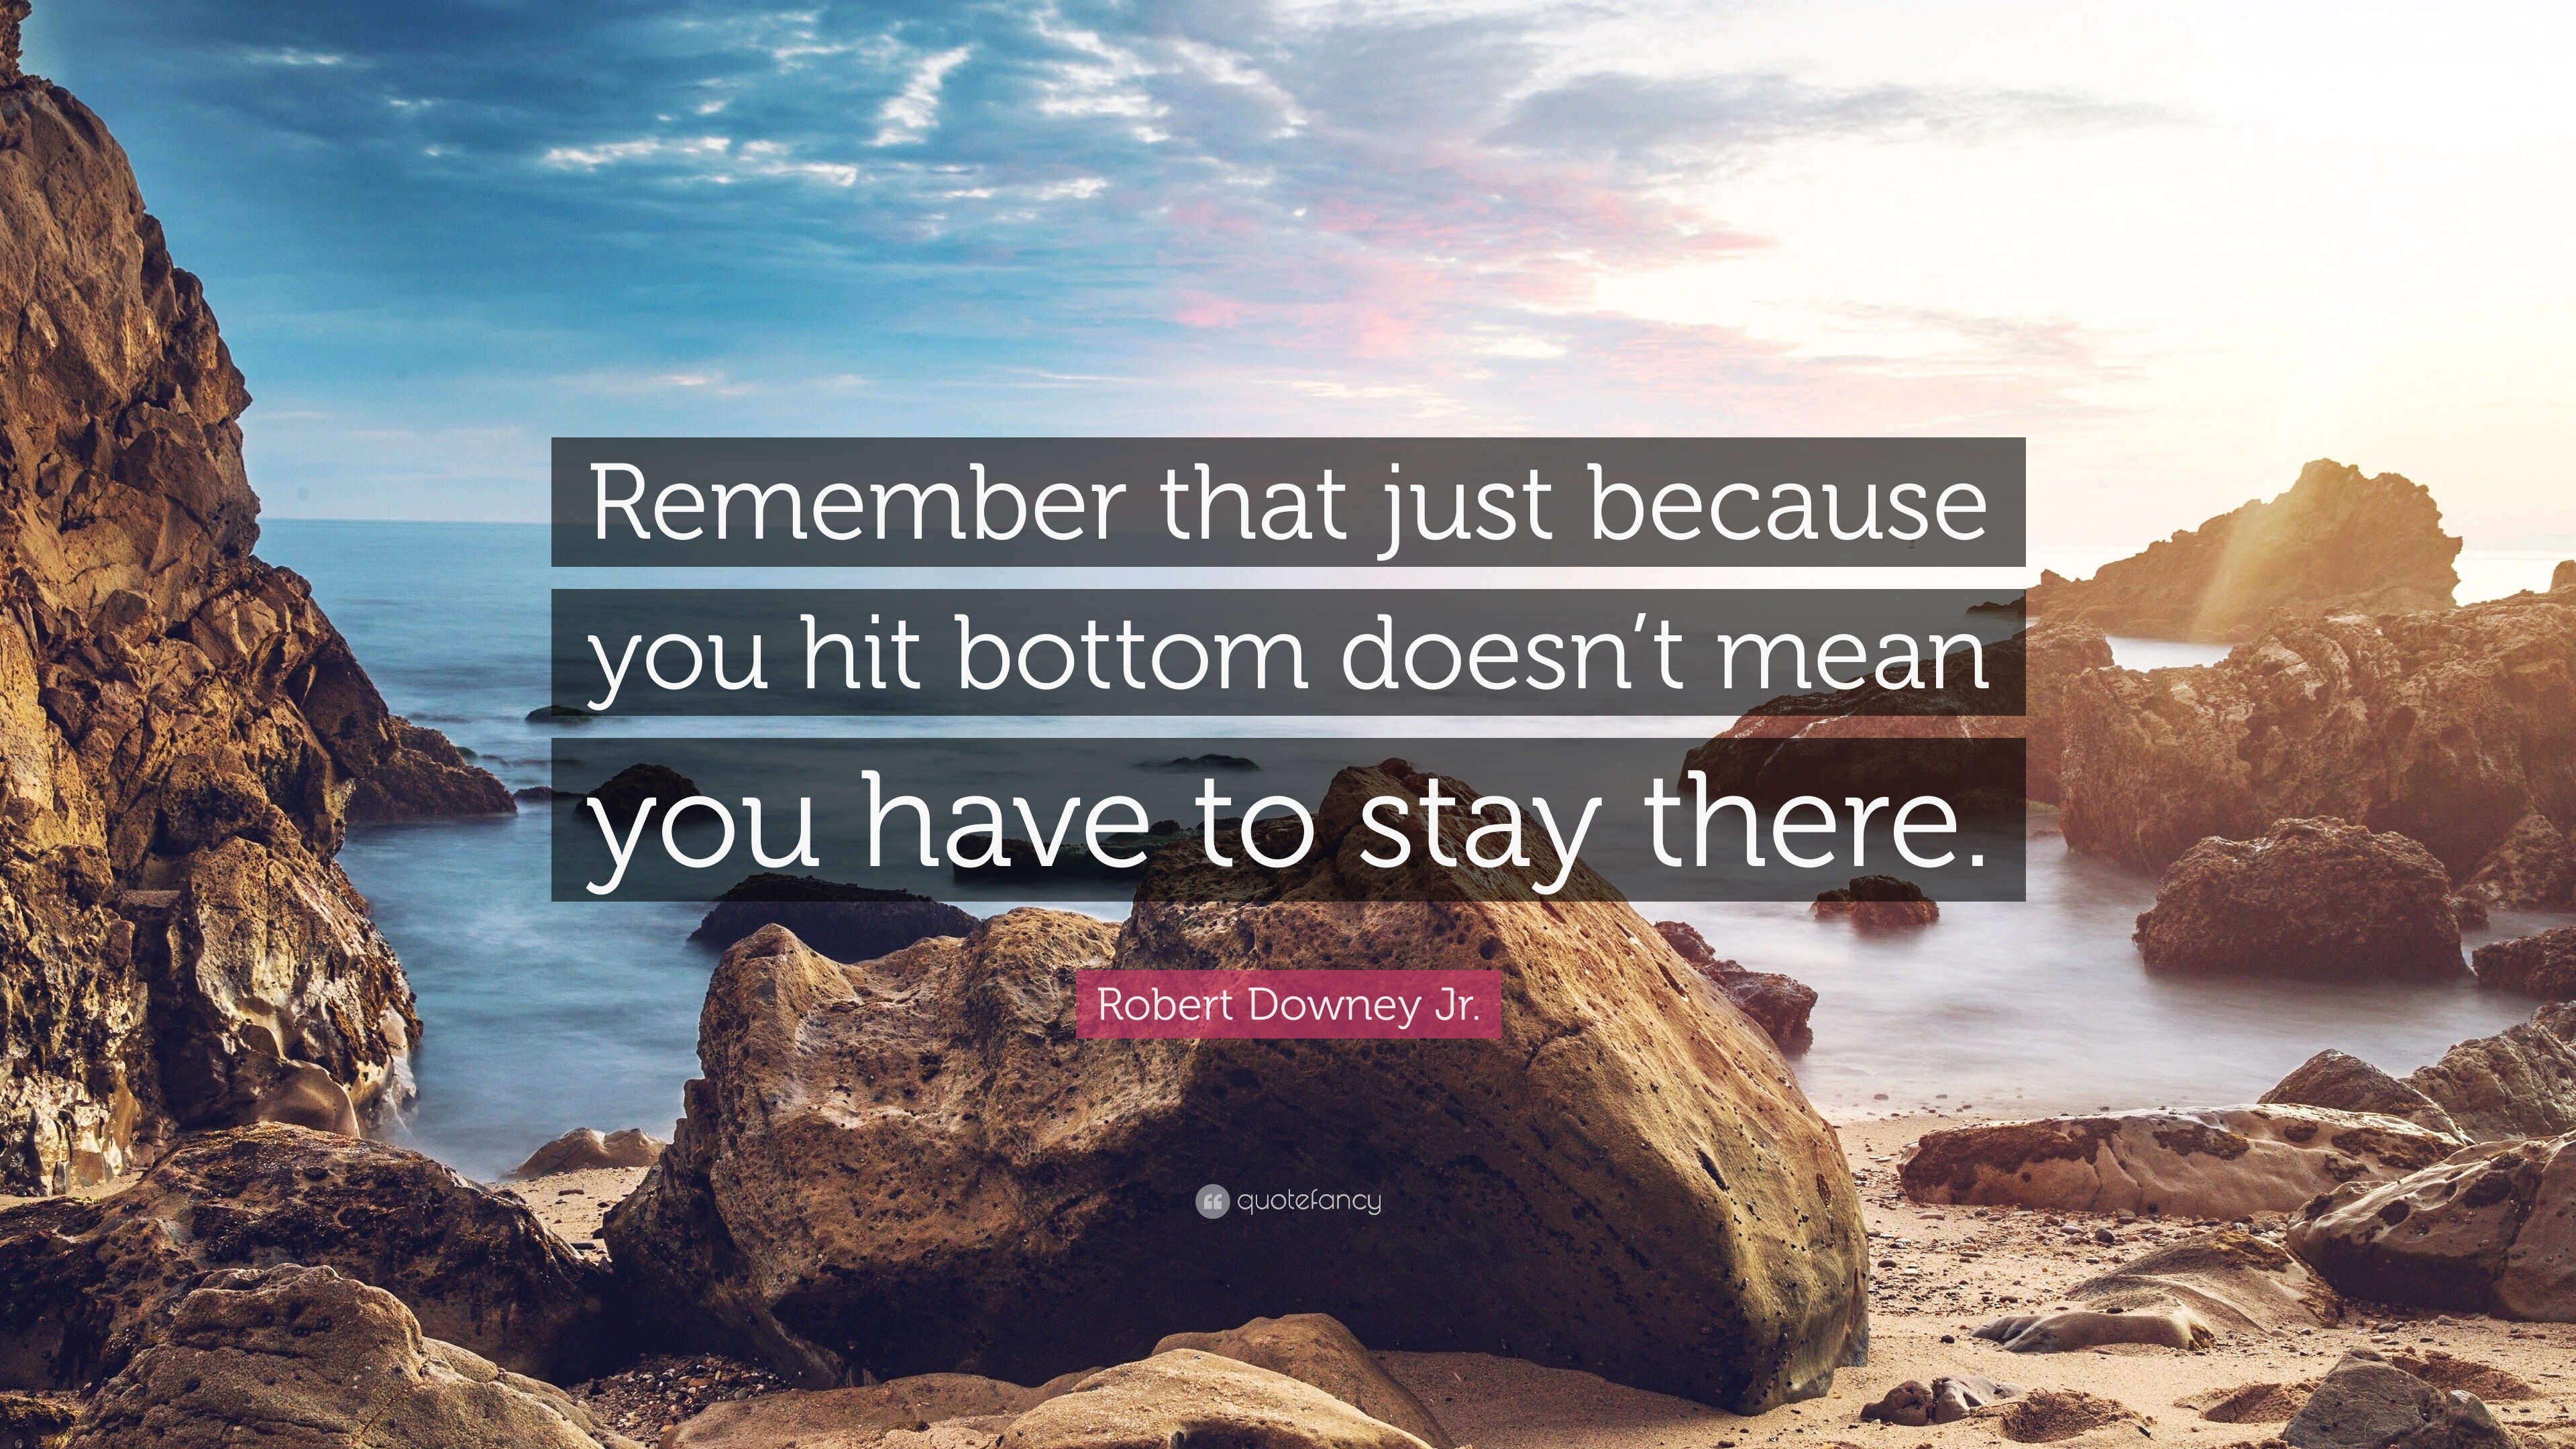 Robert Downey Jr Quote Remember That Just Because You Hit Bottom Doesn T Mean You Have To Stay There 12 Wallpapers Quotefancy